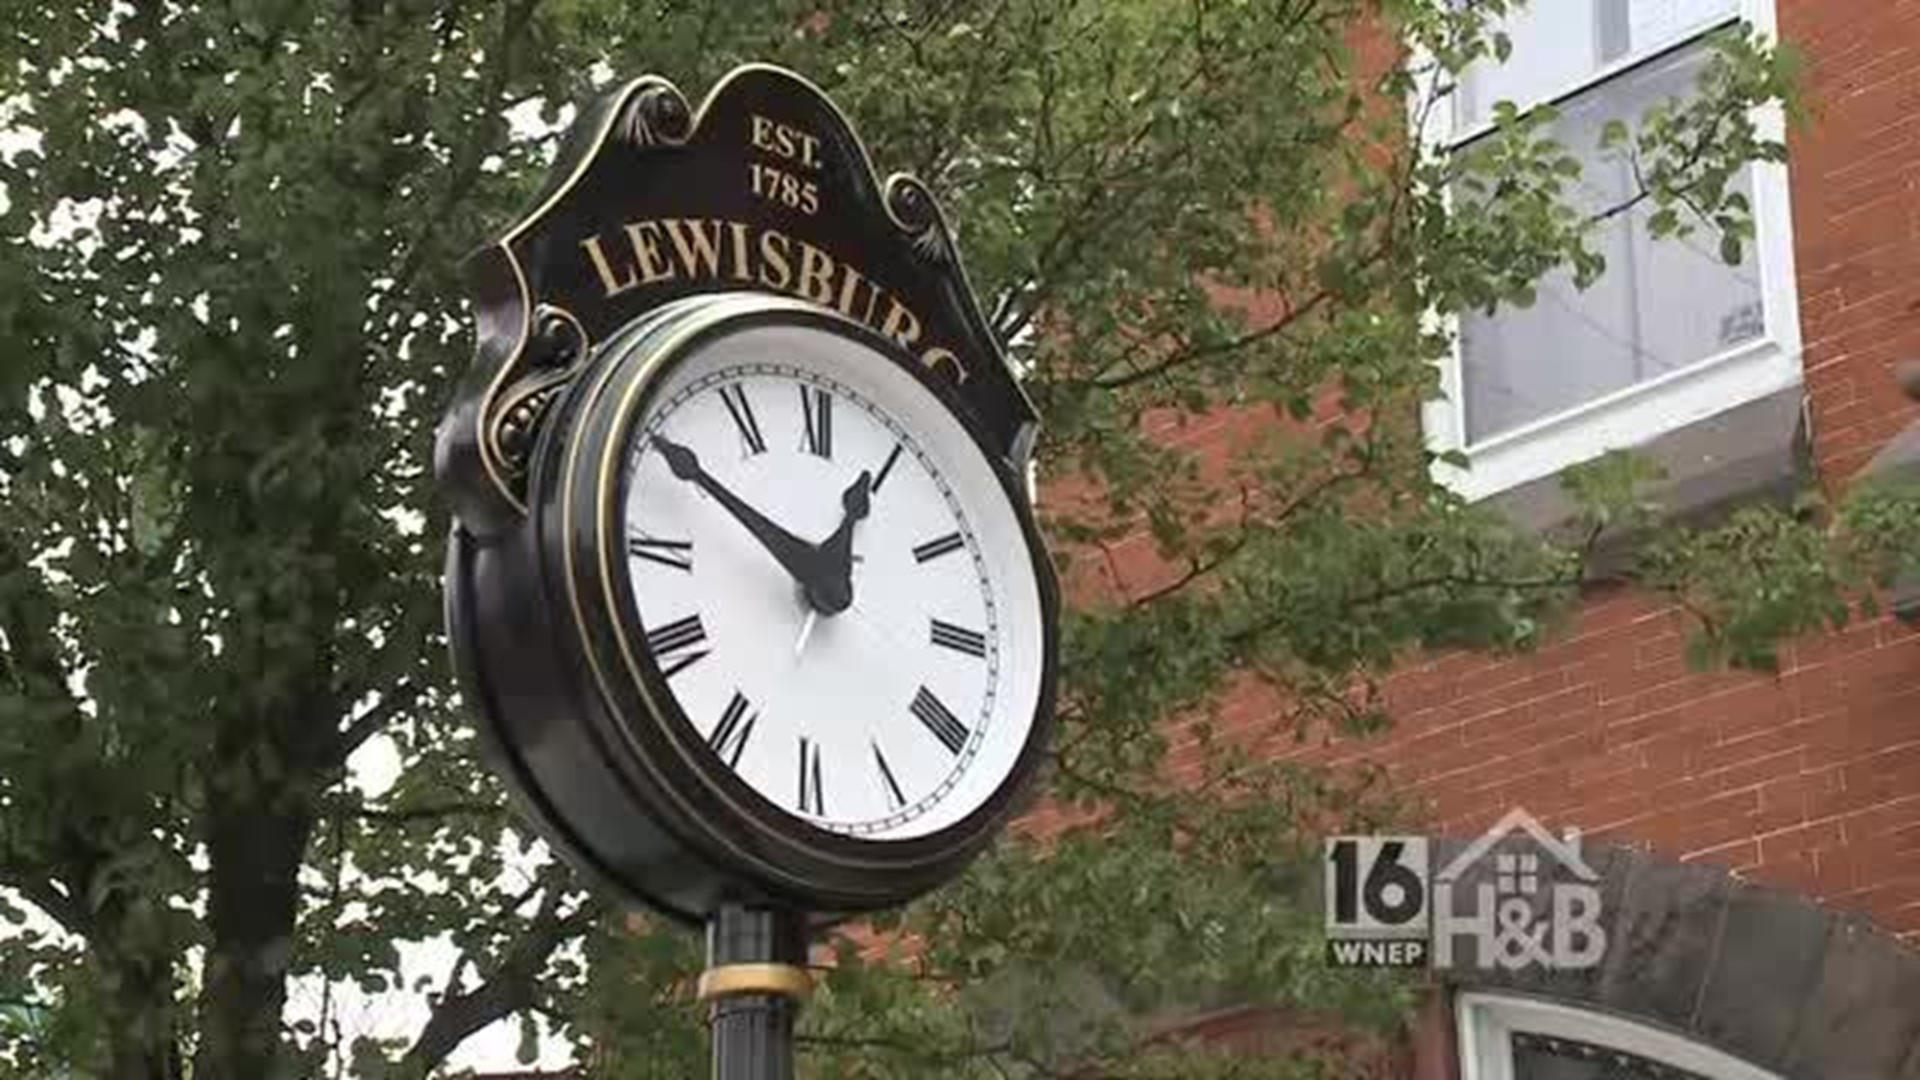 Lewisburg - Then and Now